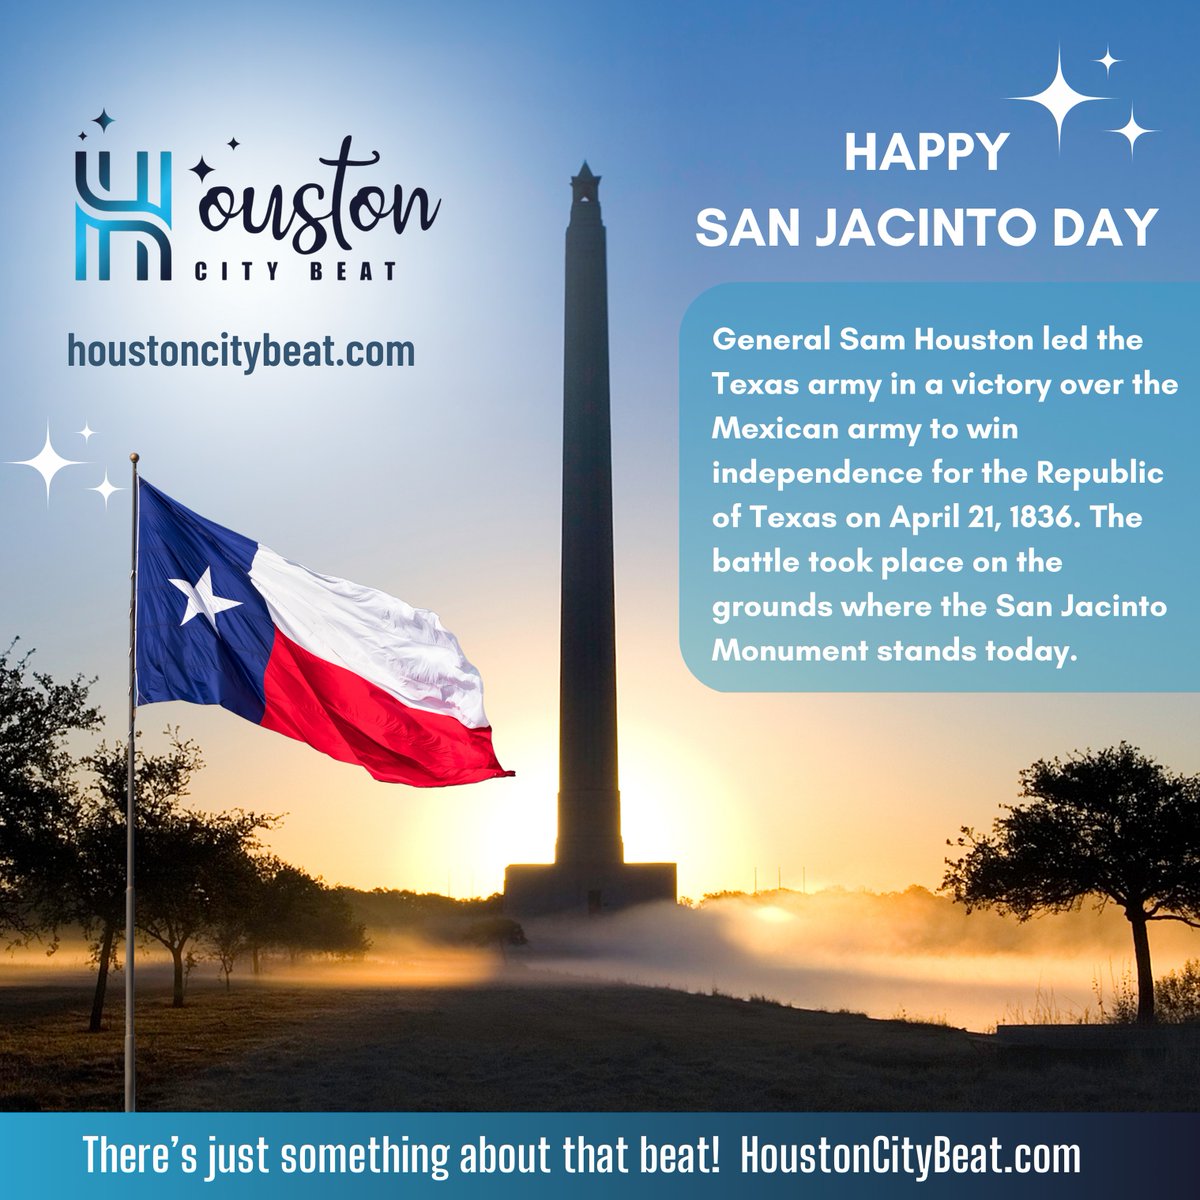 Happy San Jacinto Day! General Sam Houston led the Texas army in a victory over the Mexican army on April 21, 1836 to win independence for the Republic of Texas.

#Houston
#Texas
#TexasIndependence
#SanJacintoDay
#SanJacinto
#SamHouston
#Texans